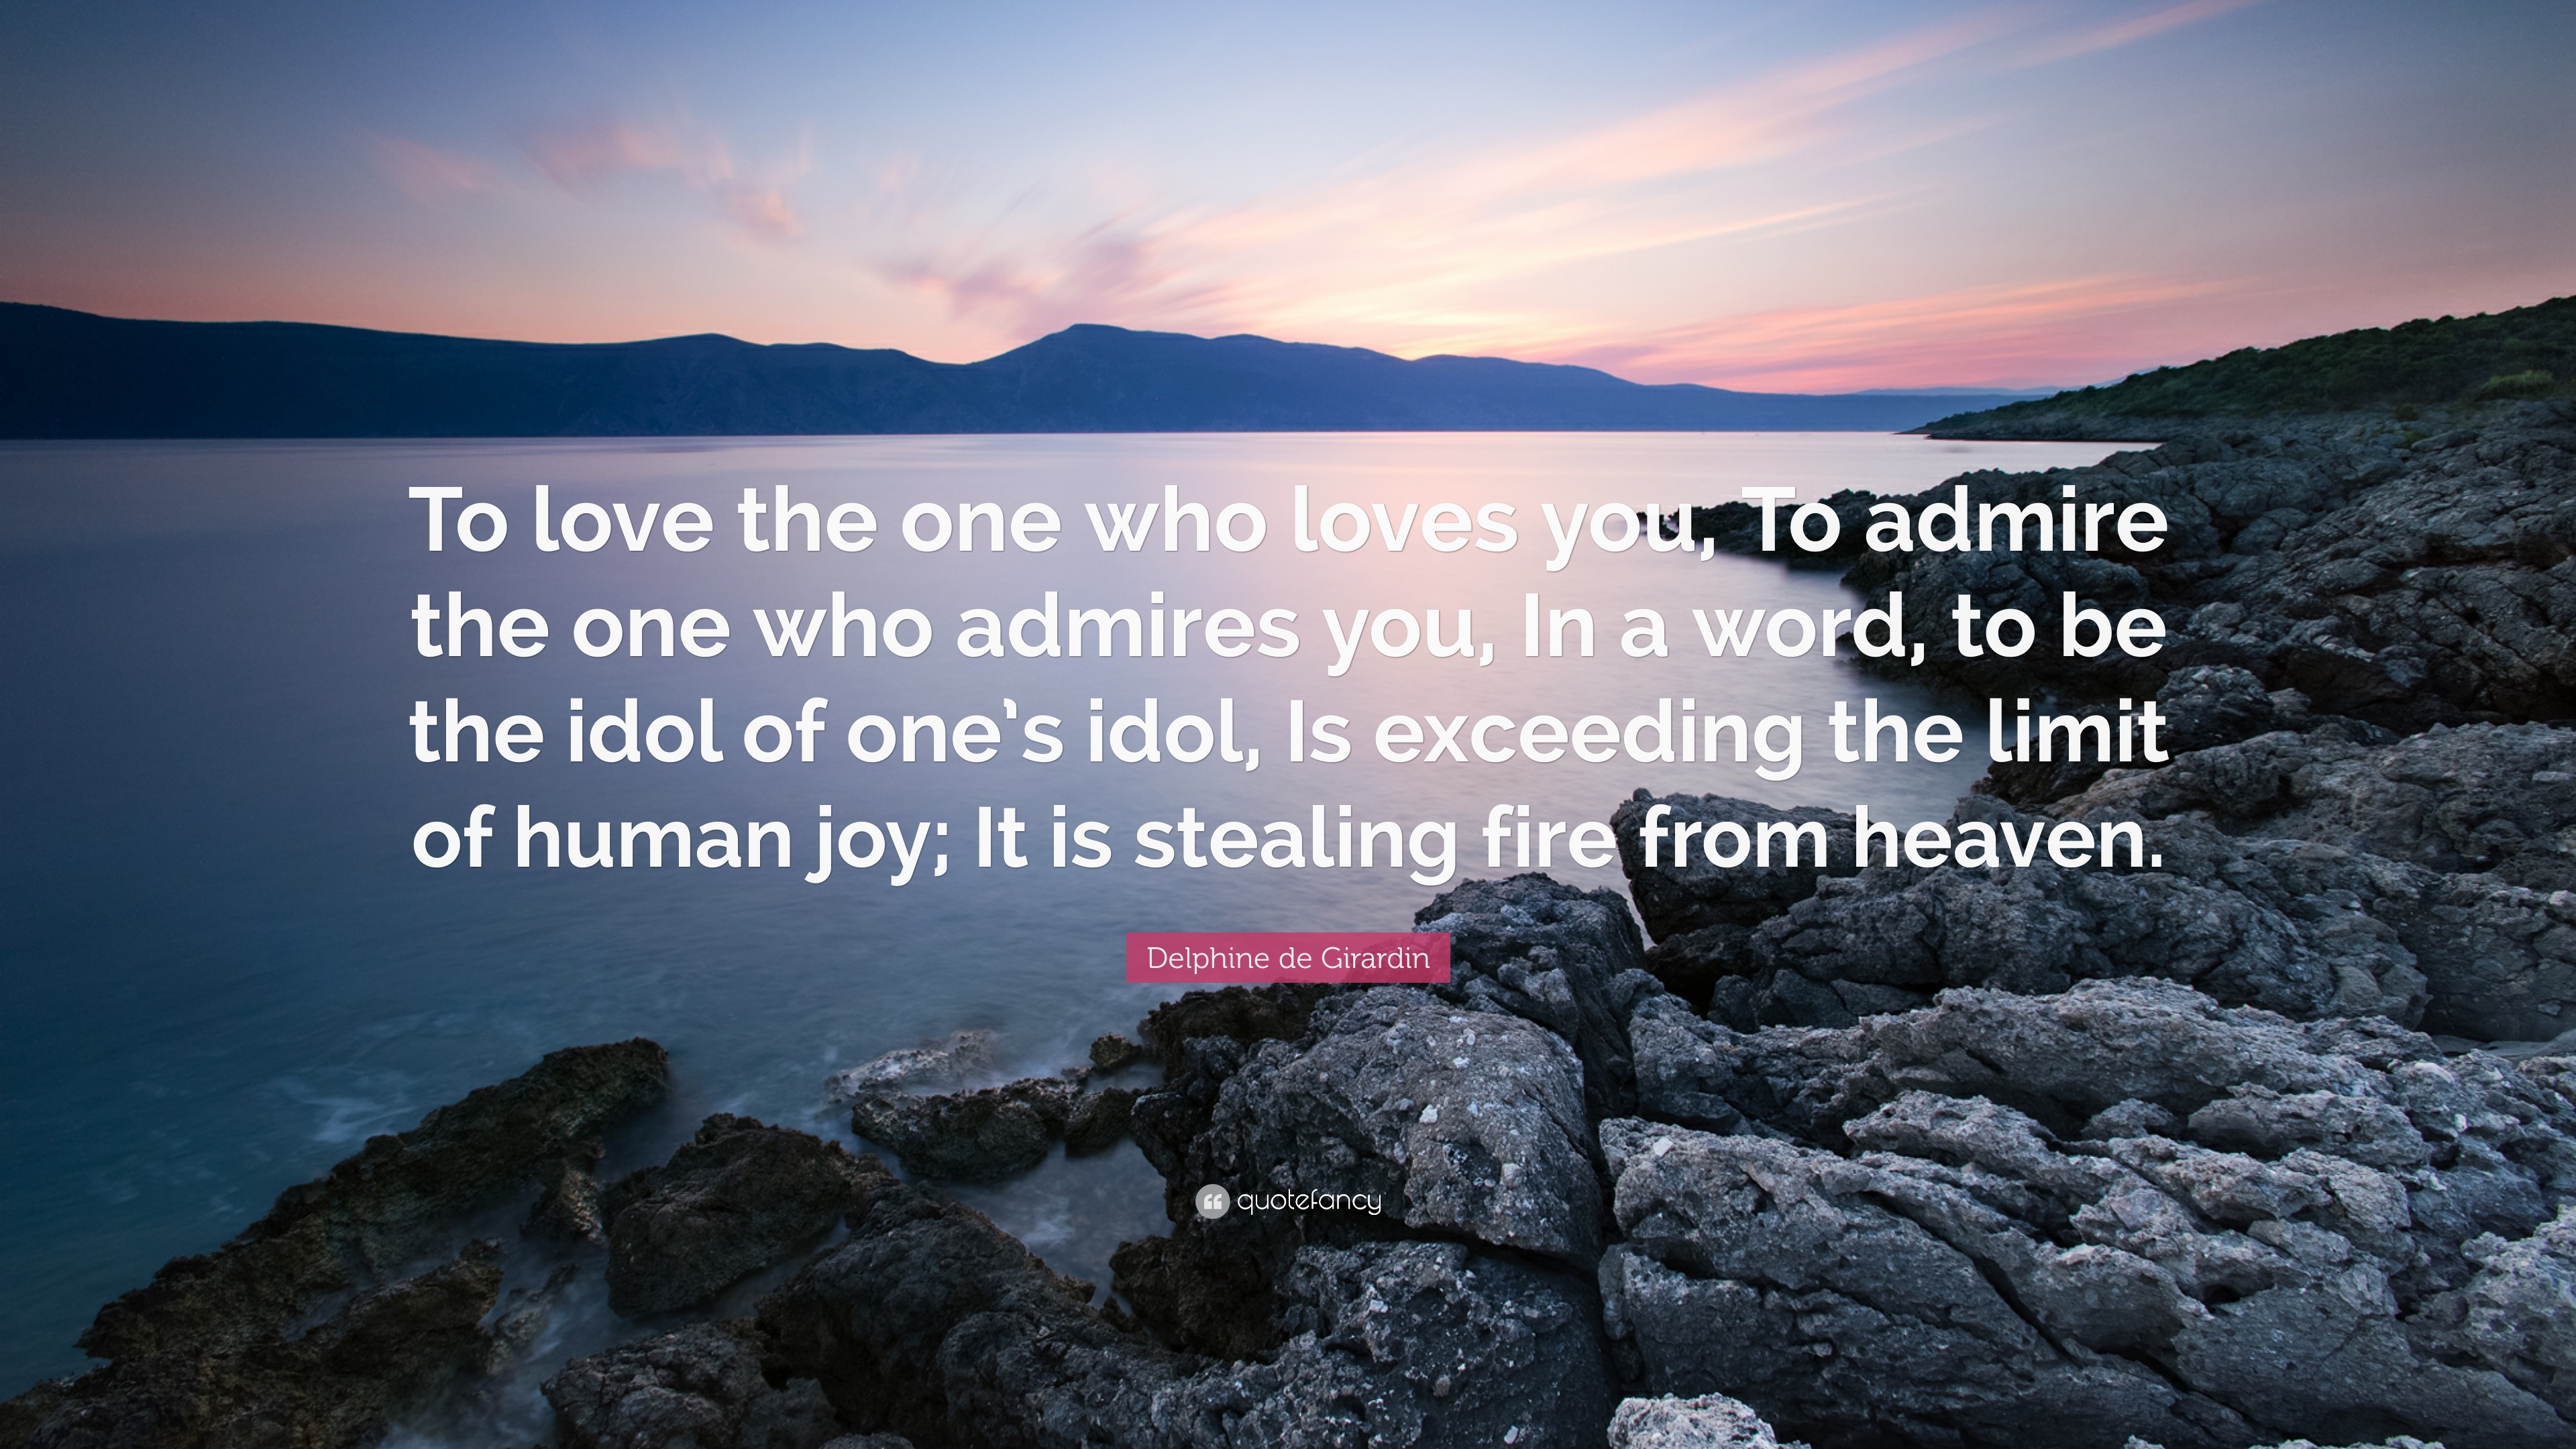 Delphine de Girardin Quote “To love the one who loves you To admire